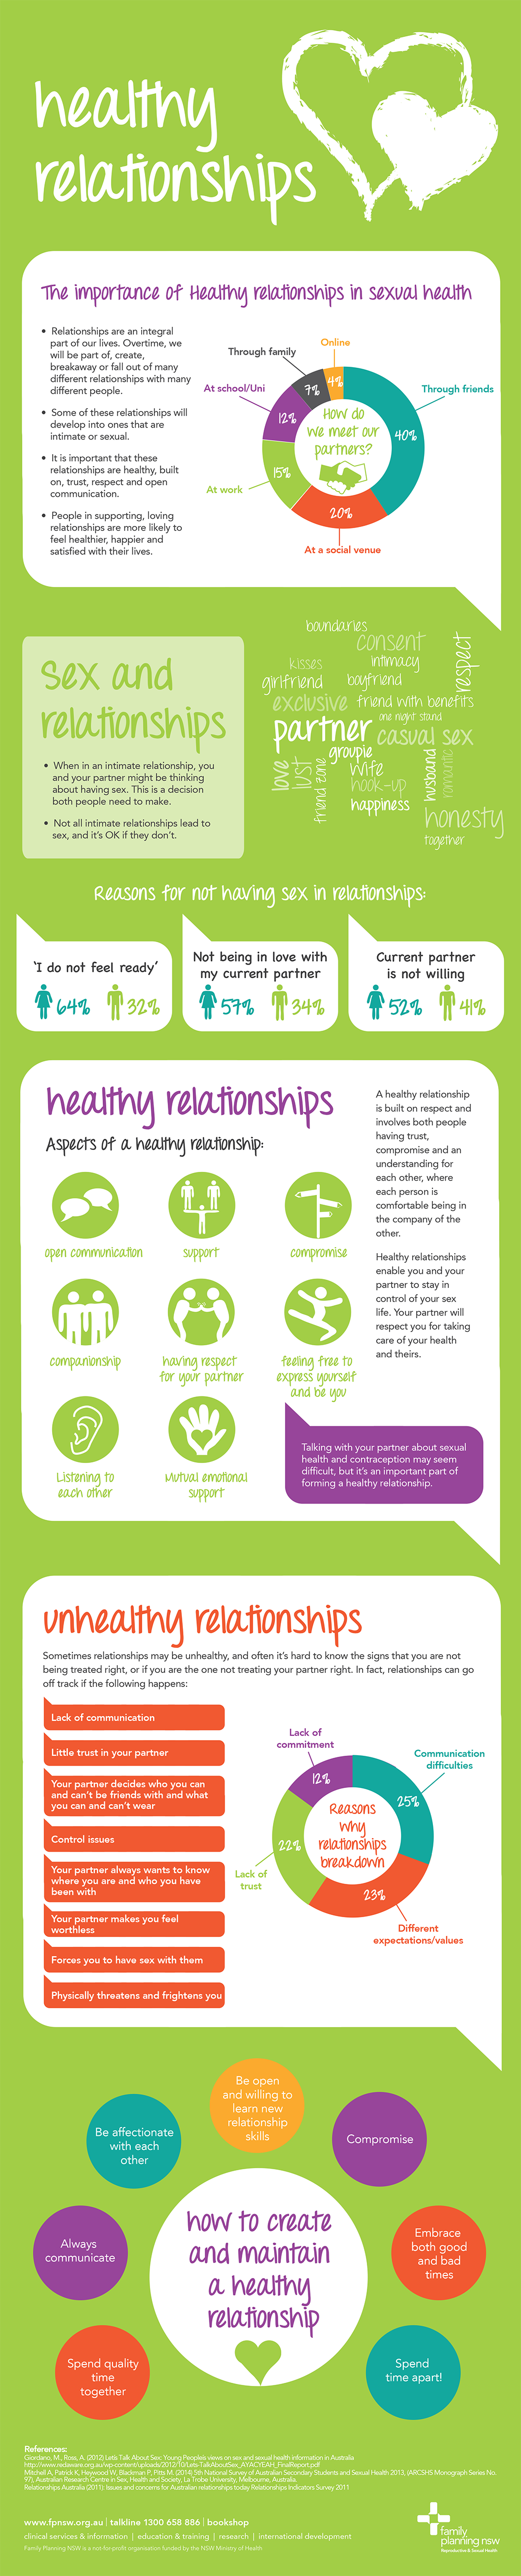 relationships-infographic